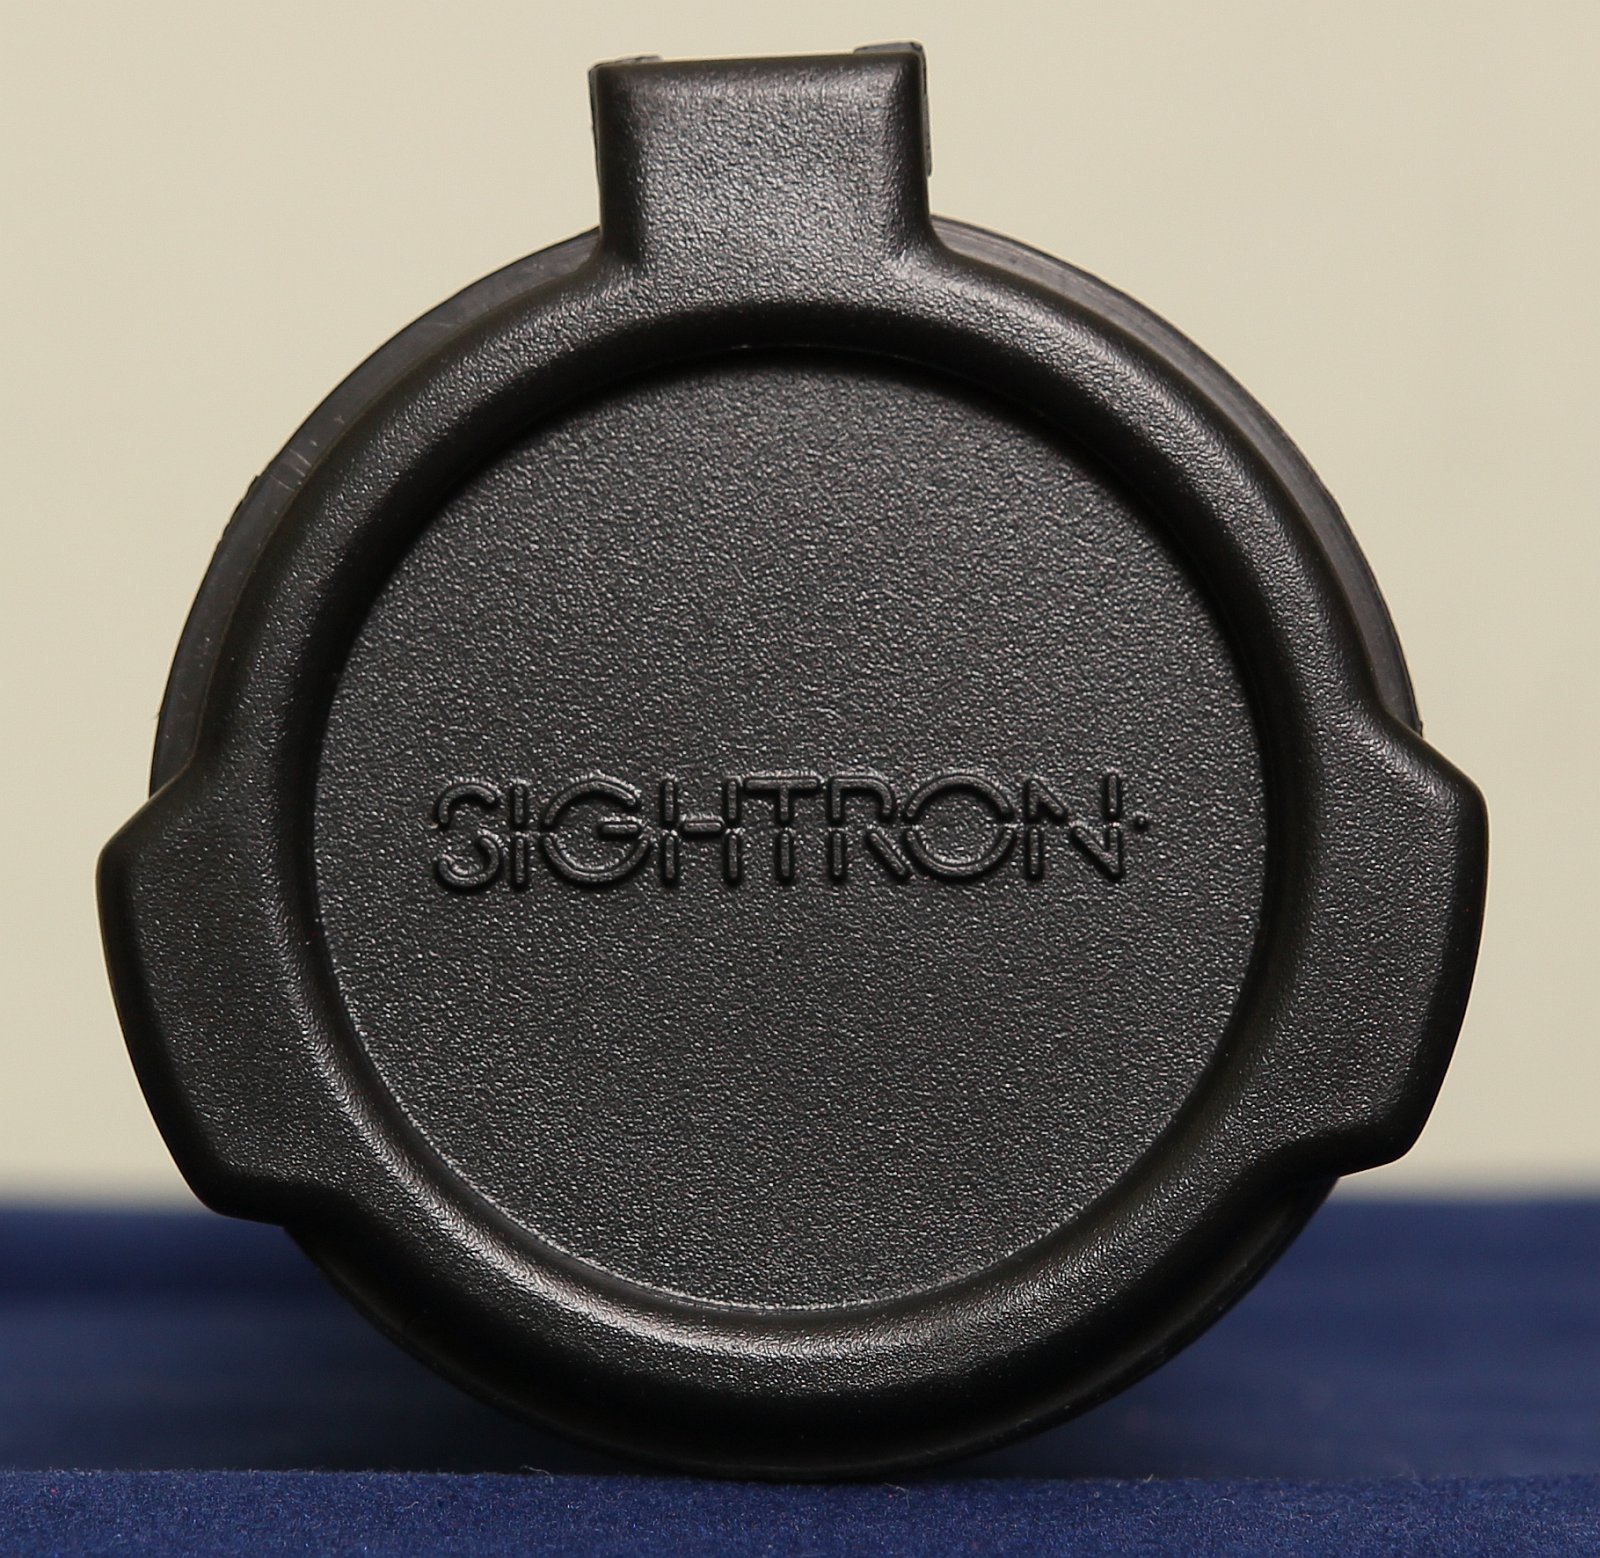 Sightron SIII 6-24 FFP Review